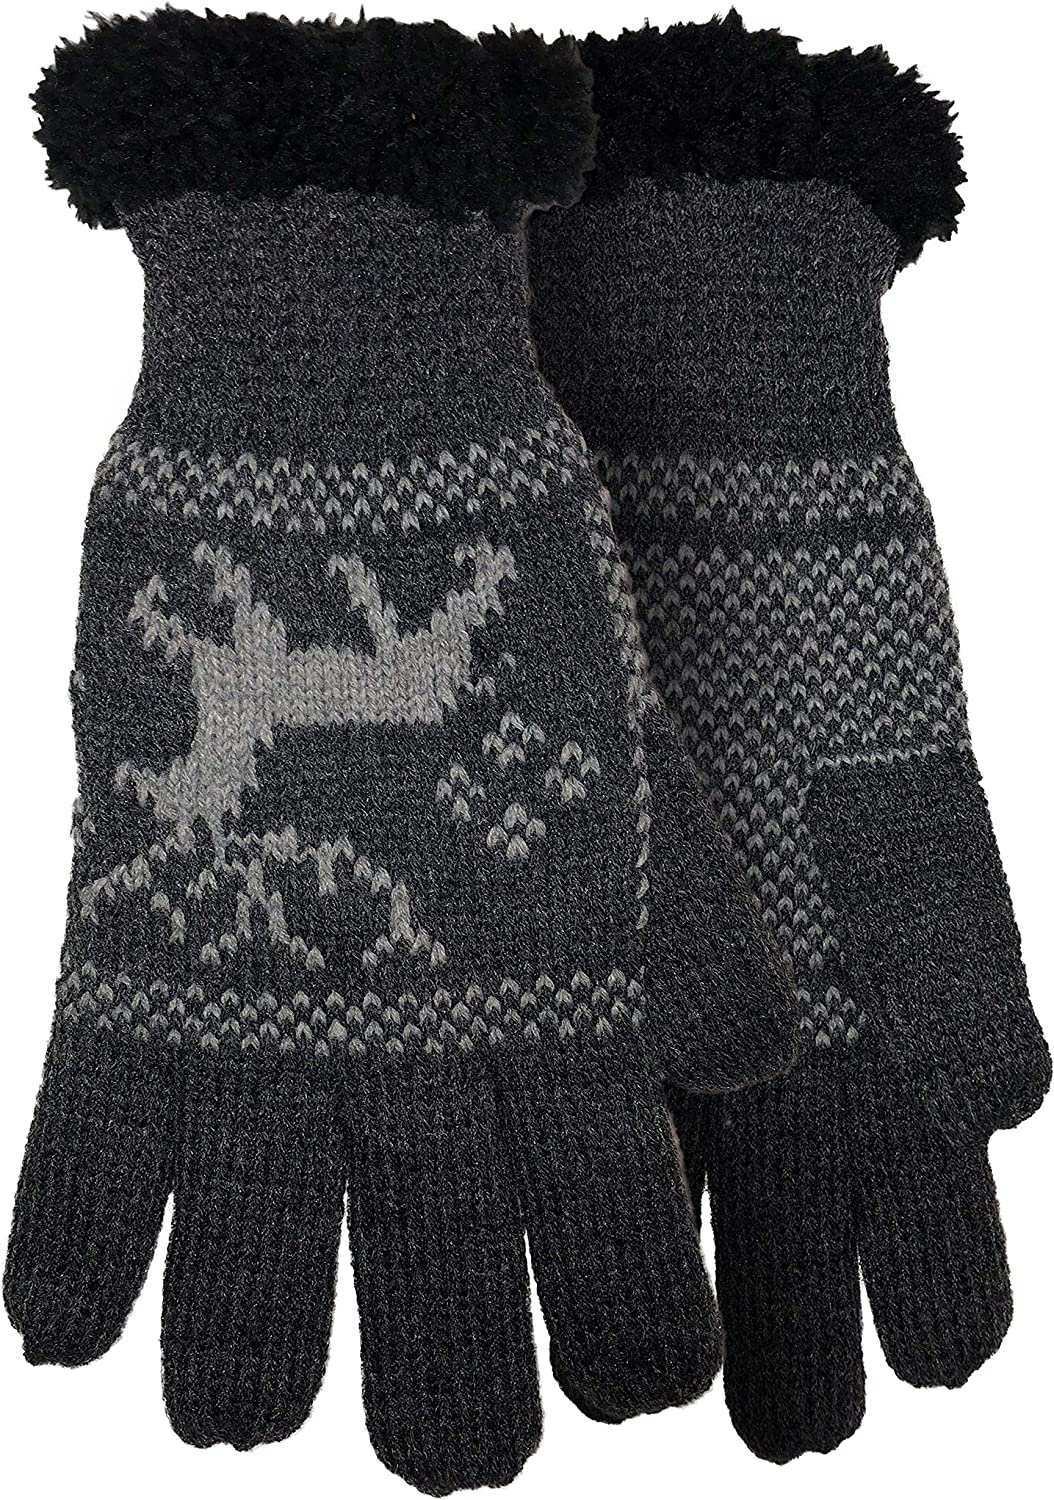 WINTER GLOVES UGLY SWEATER SMALL